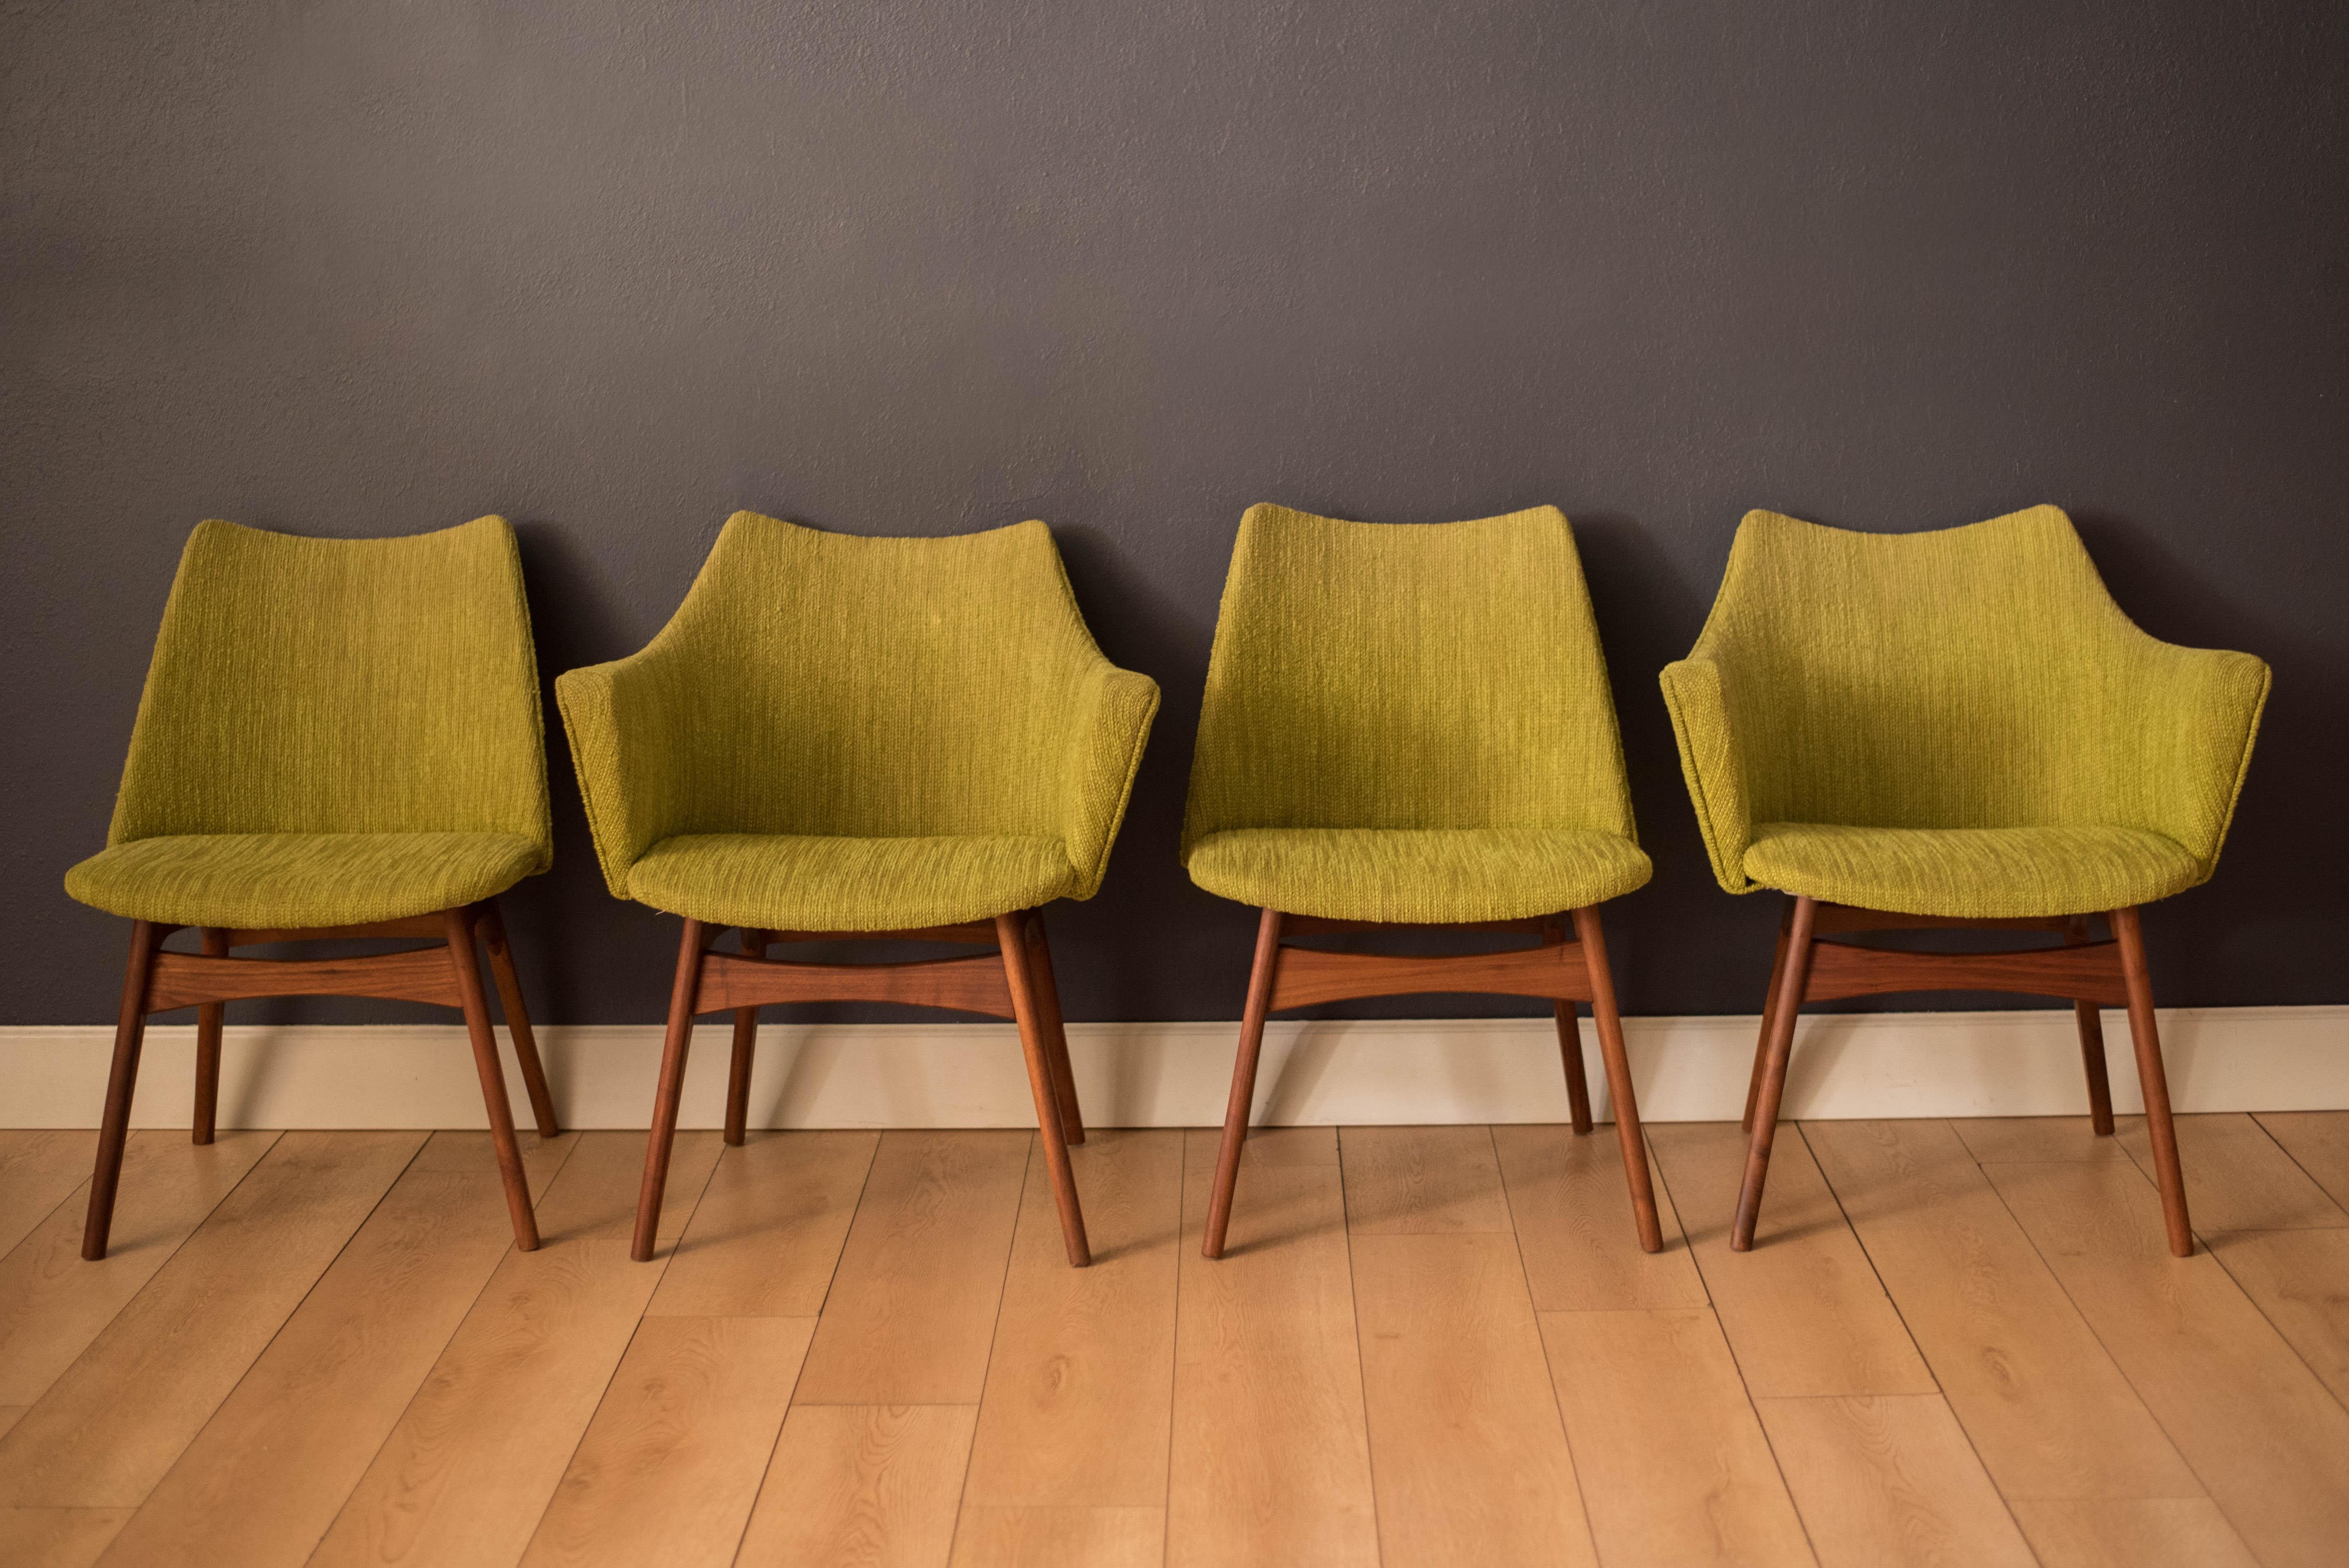 American Vintage Set of Four Walnut Dining Chairs by Adrian Pearsall for Craft Associates